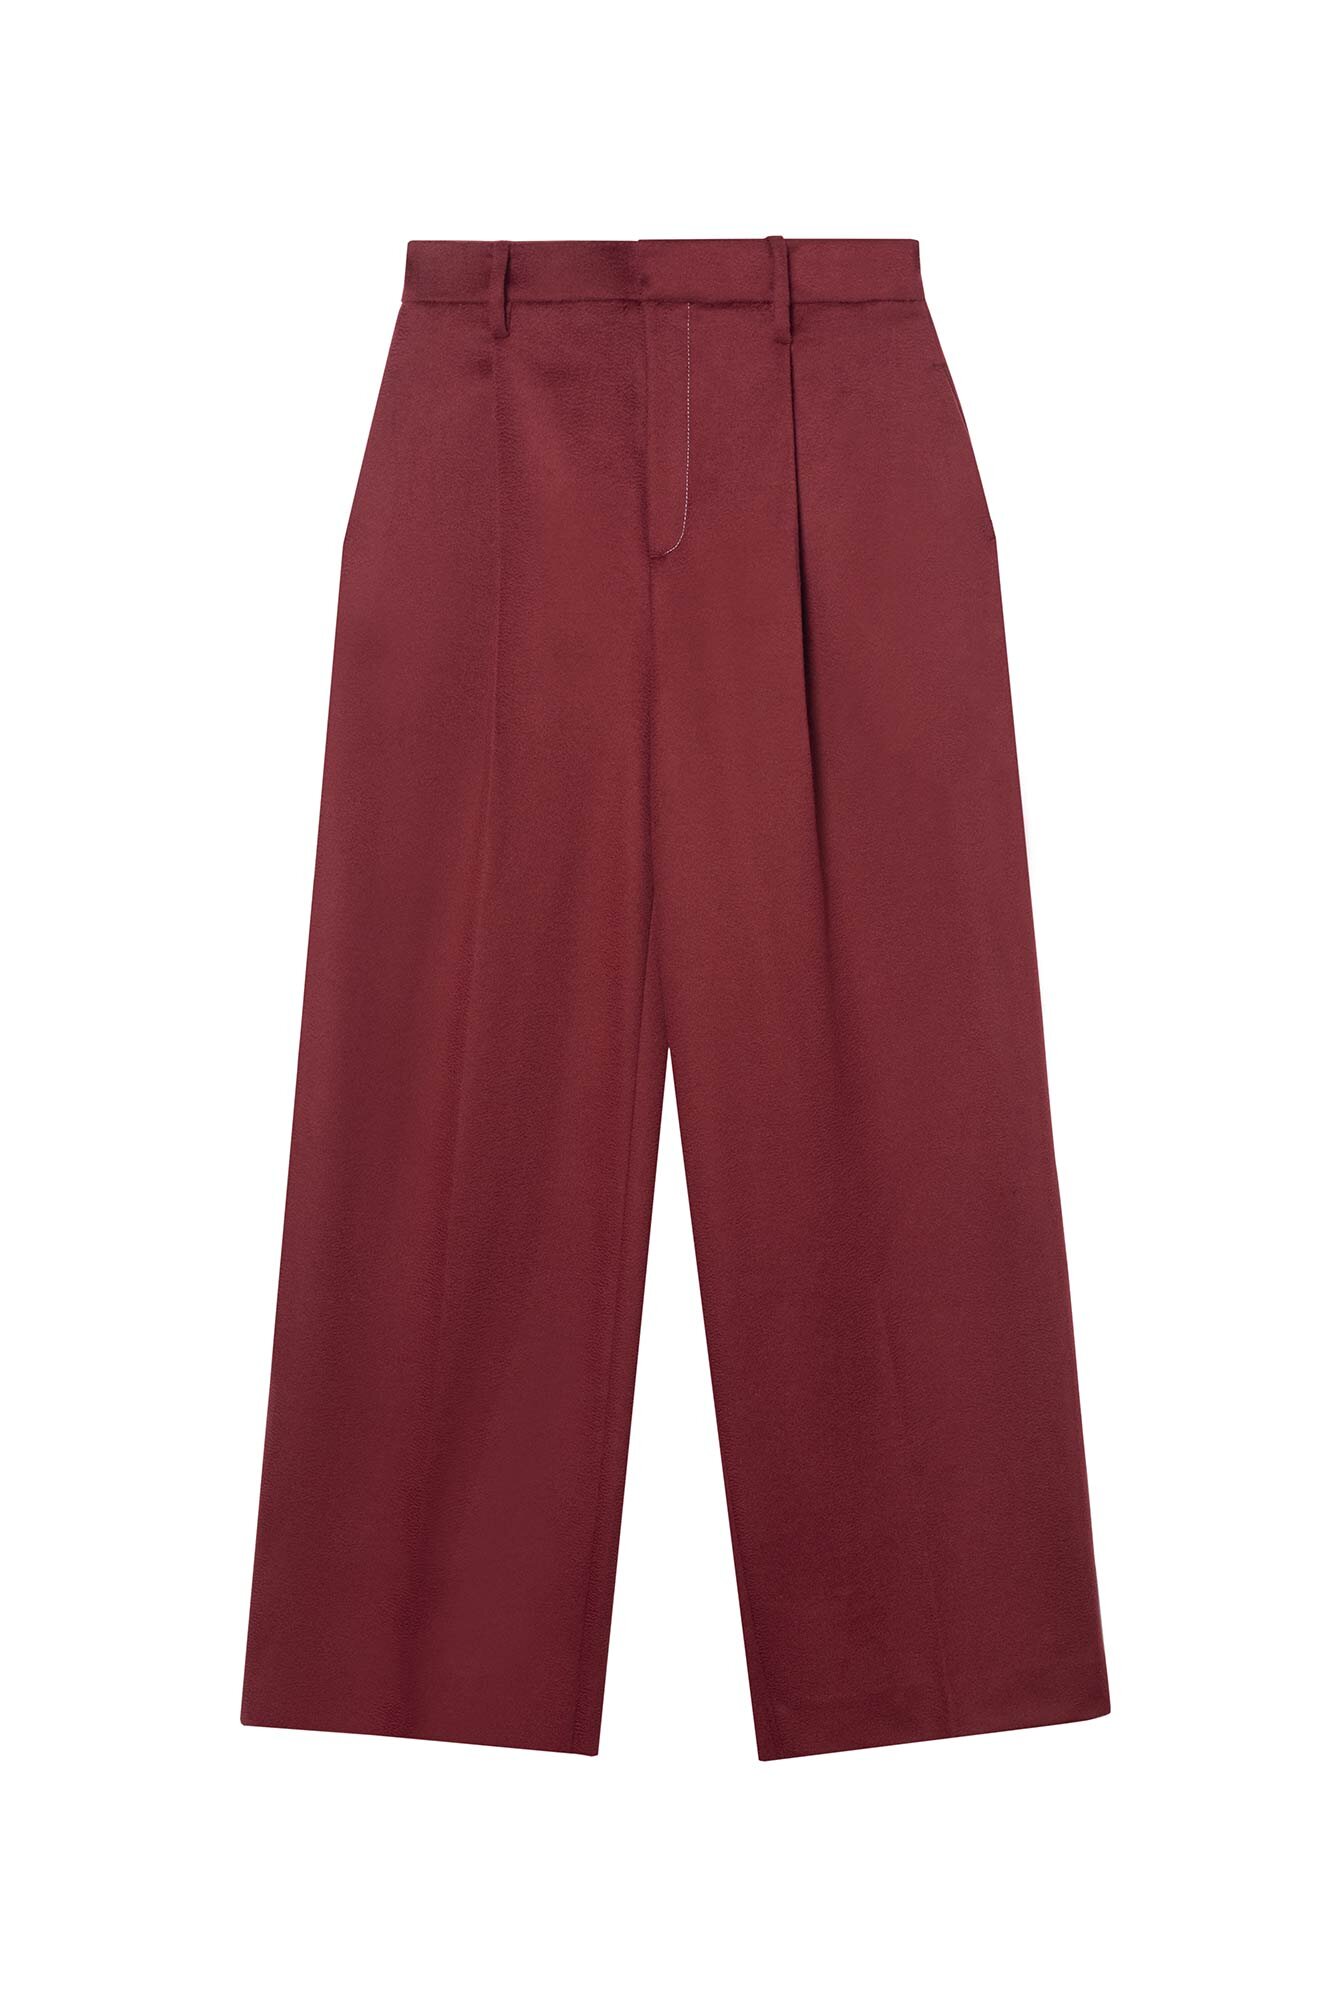 Alter Designs Wool Trousers in Red.jpg